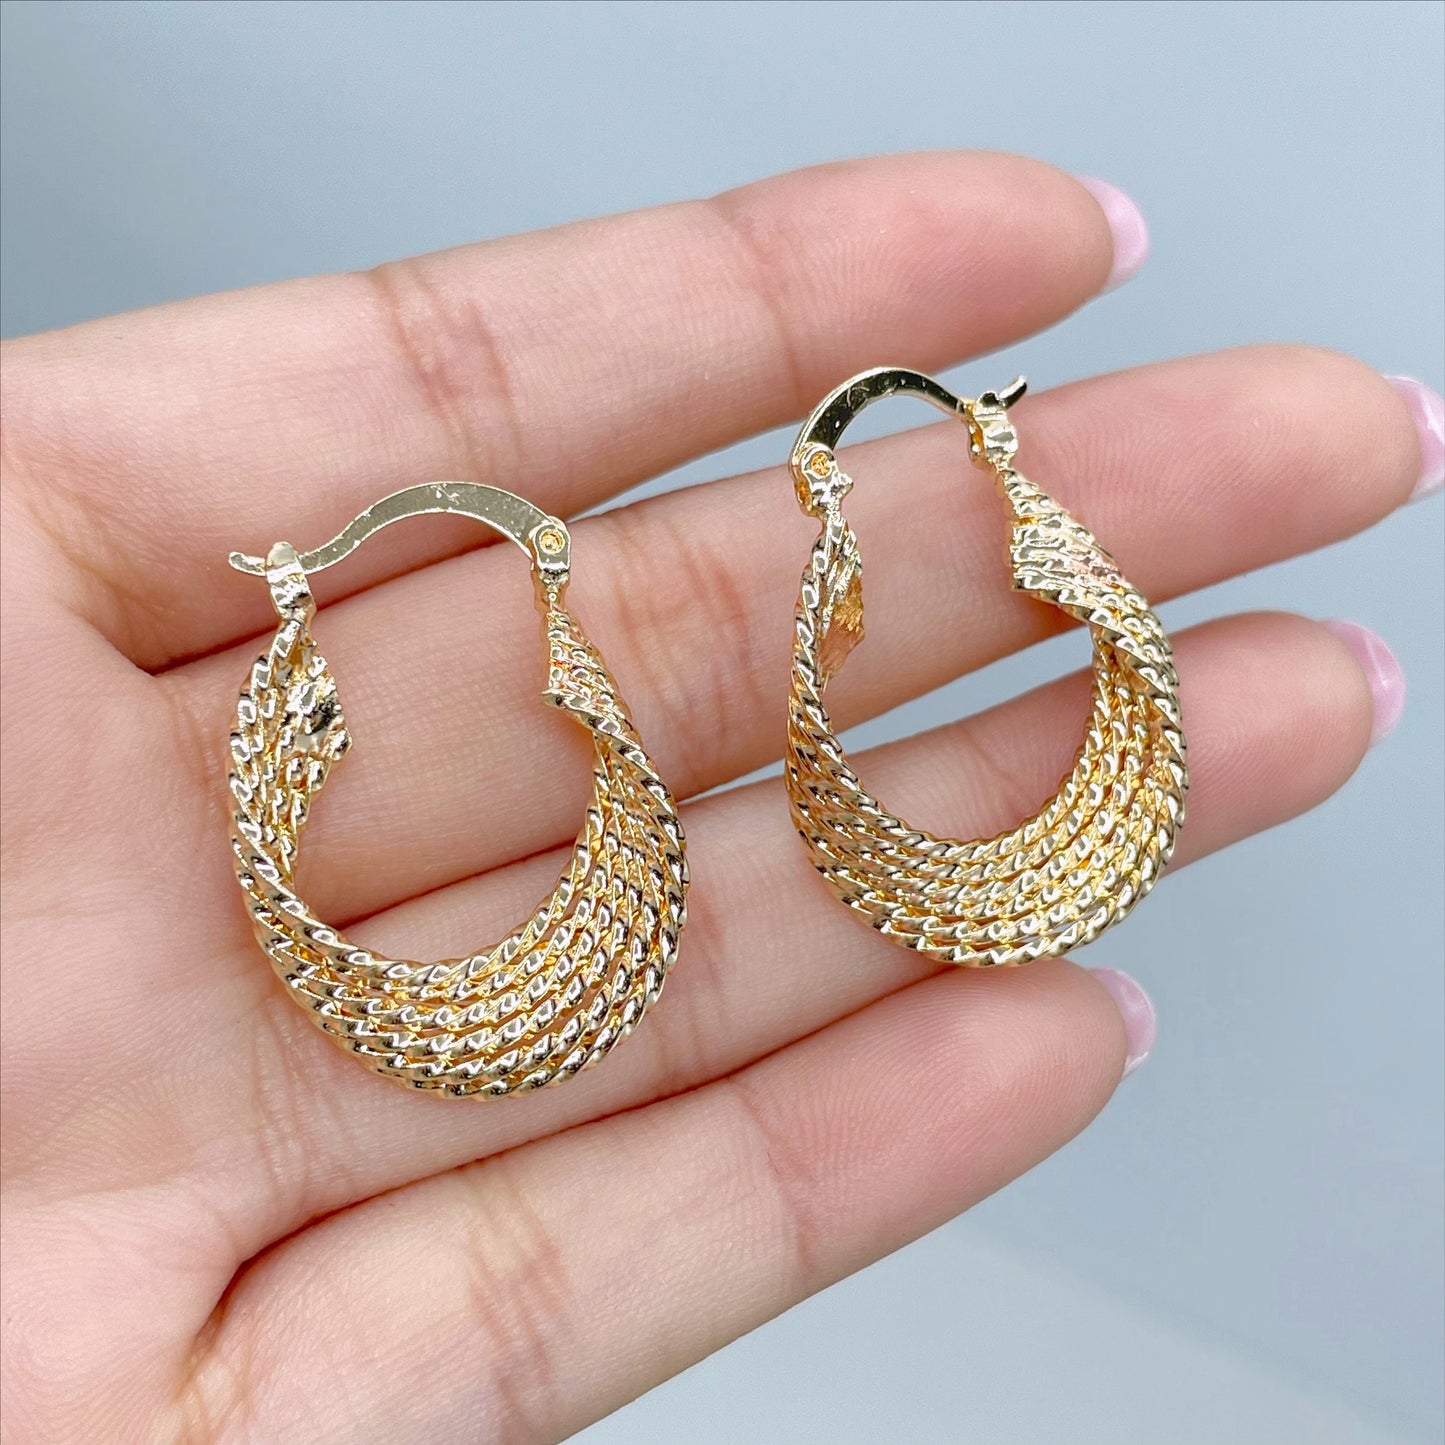 18k Gold Filled  22mm Braided Hoop Earrings, 6mm Thickness,  Wholesale Jewelry Making Supplies